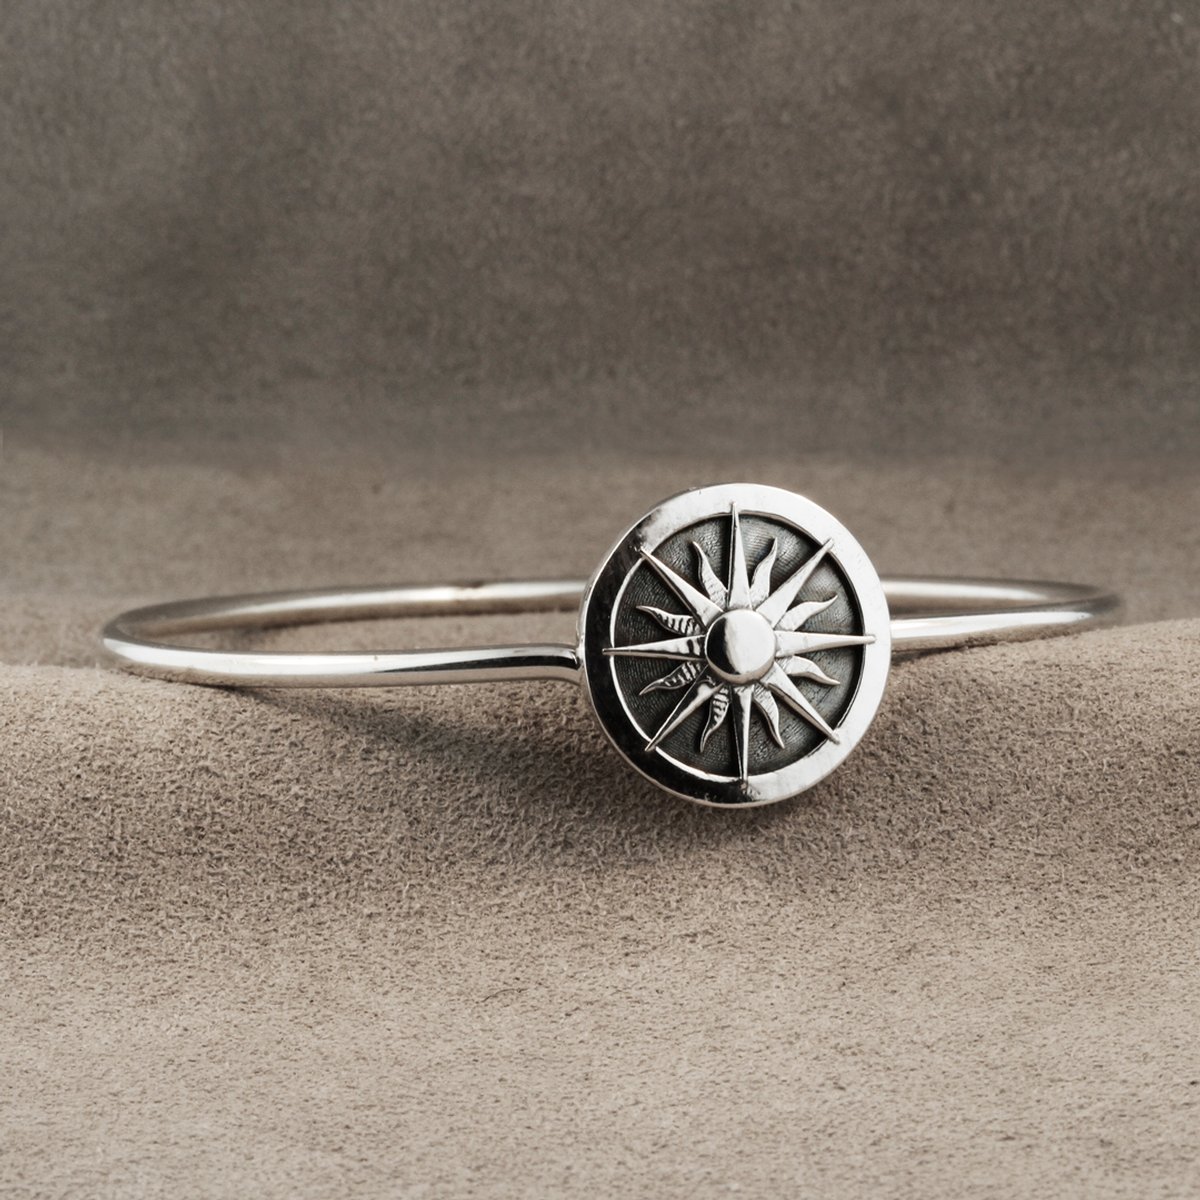 CapeLuv Charm Bangle With Compass Rose